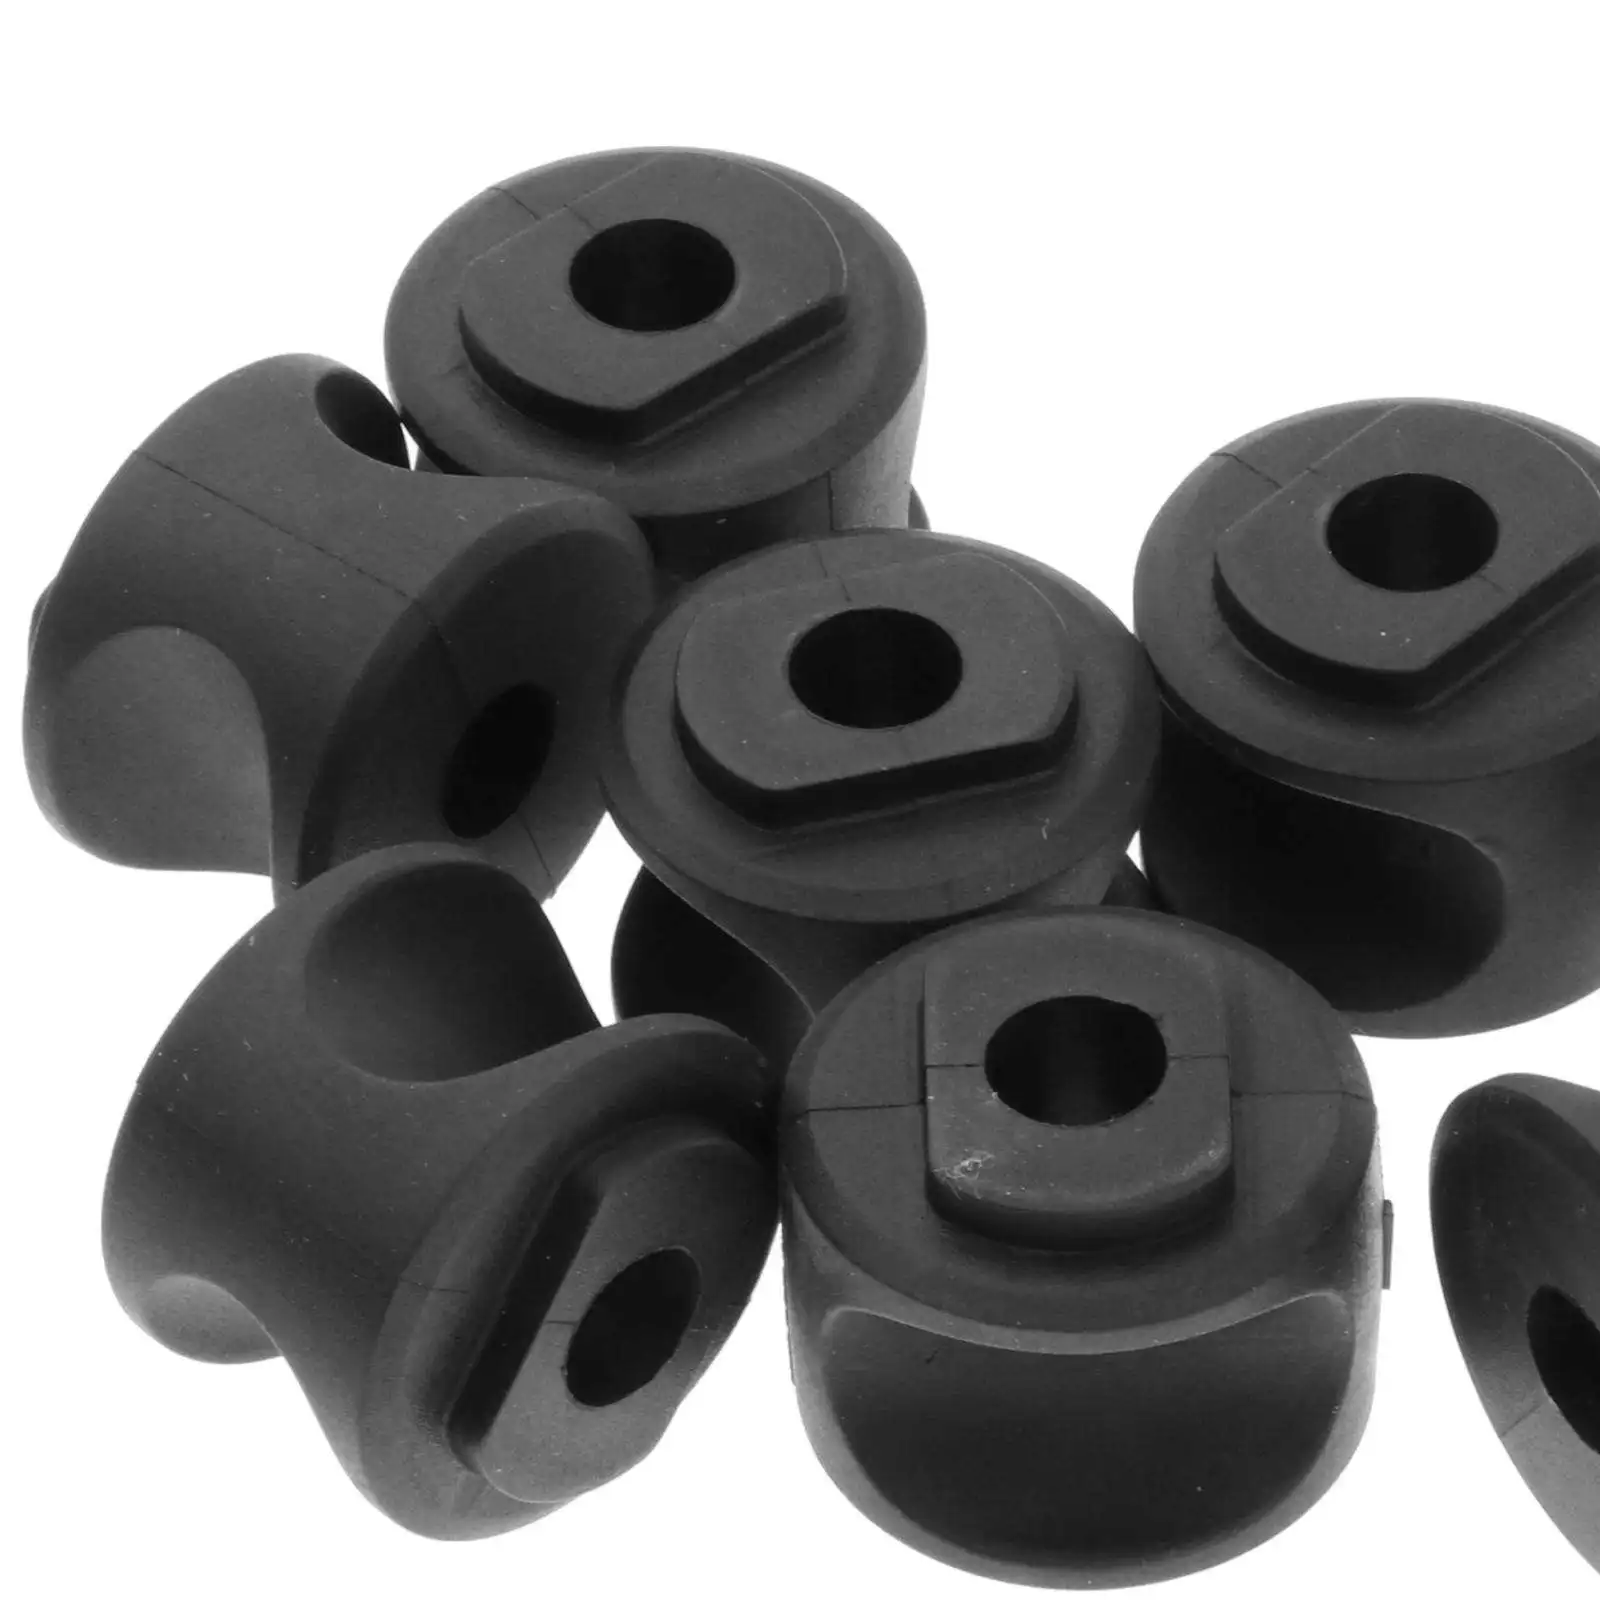 8 Pieces Rear Stabilizer Support Bushing 5432598 for Polaris 1997-2005 Sportsman 500